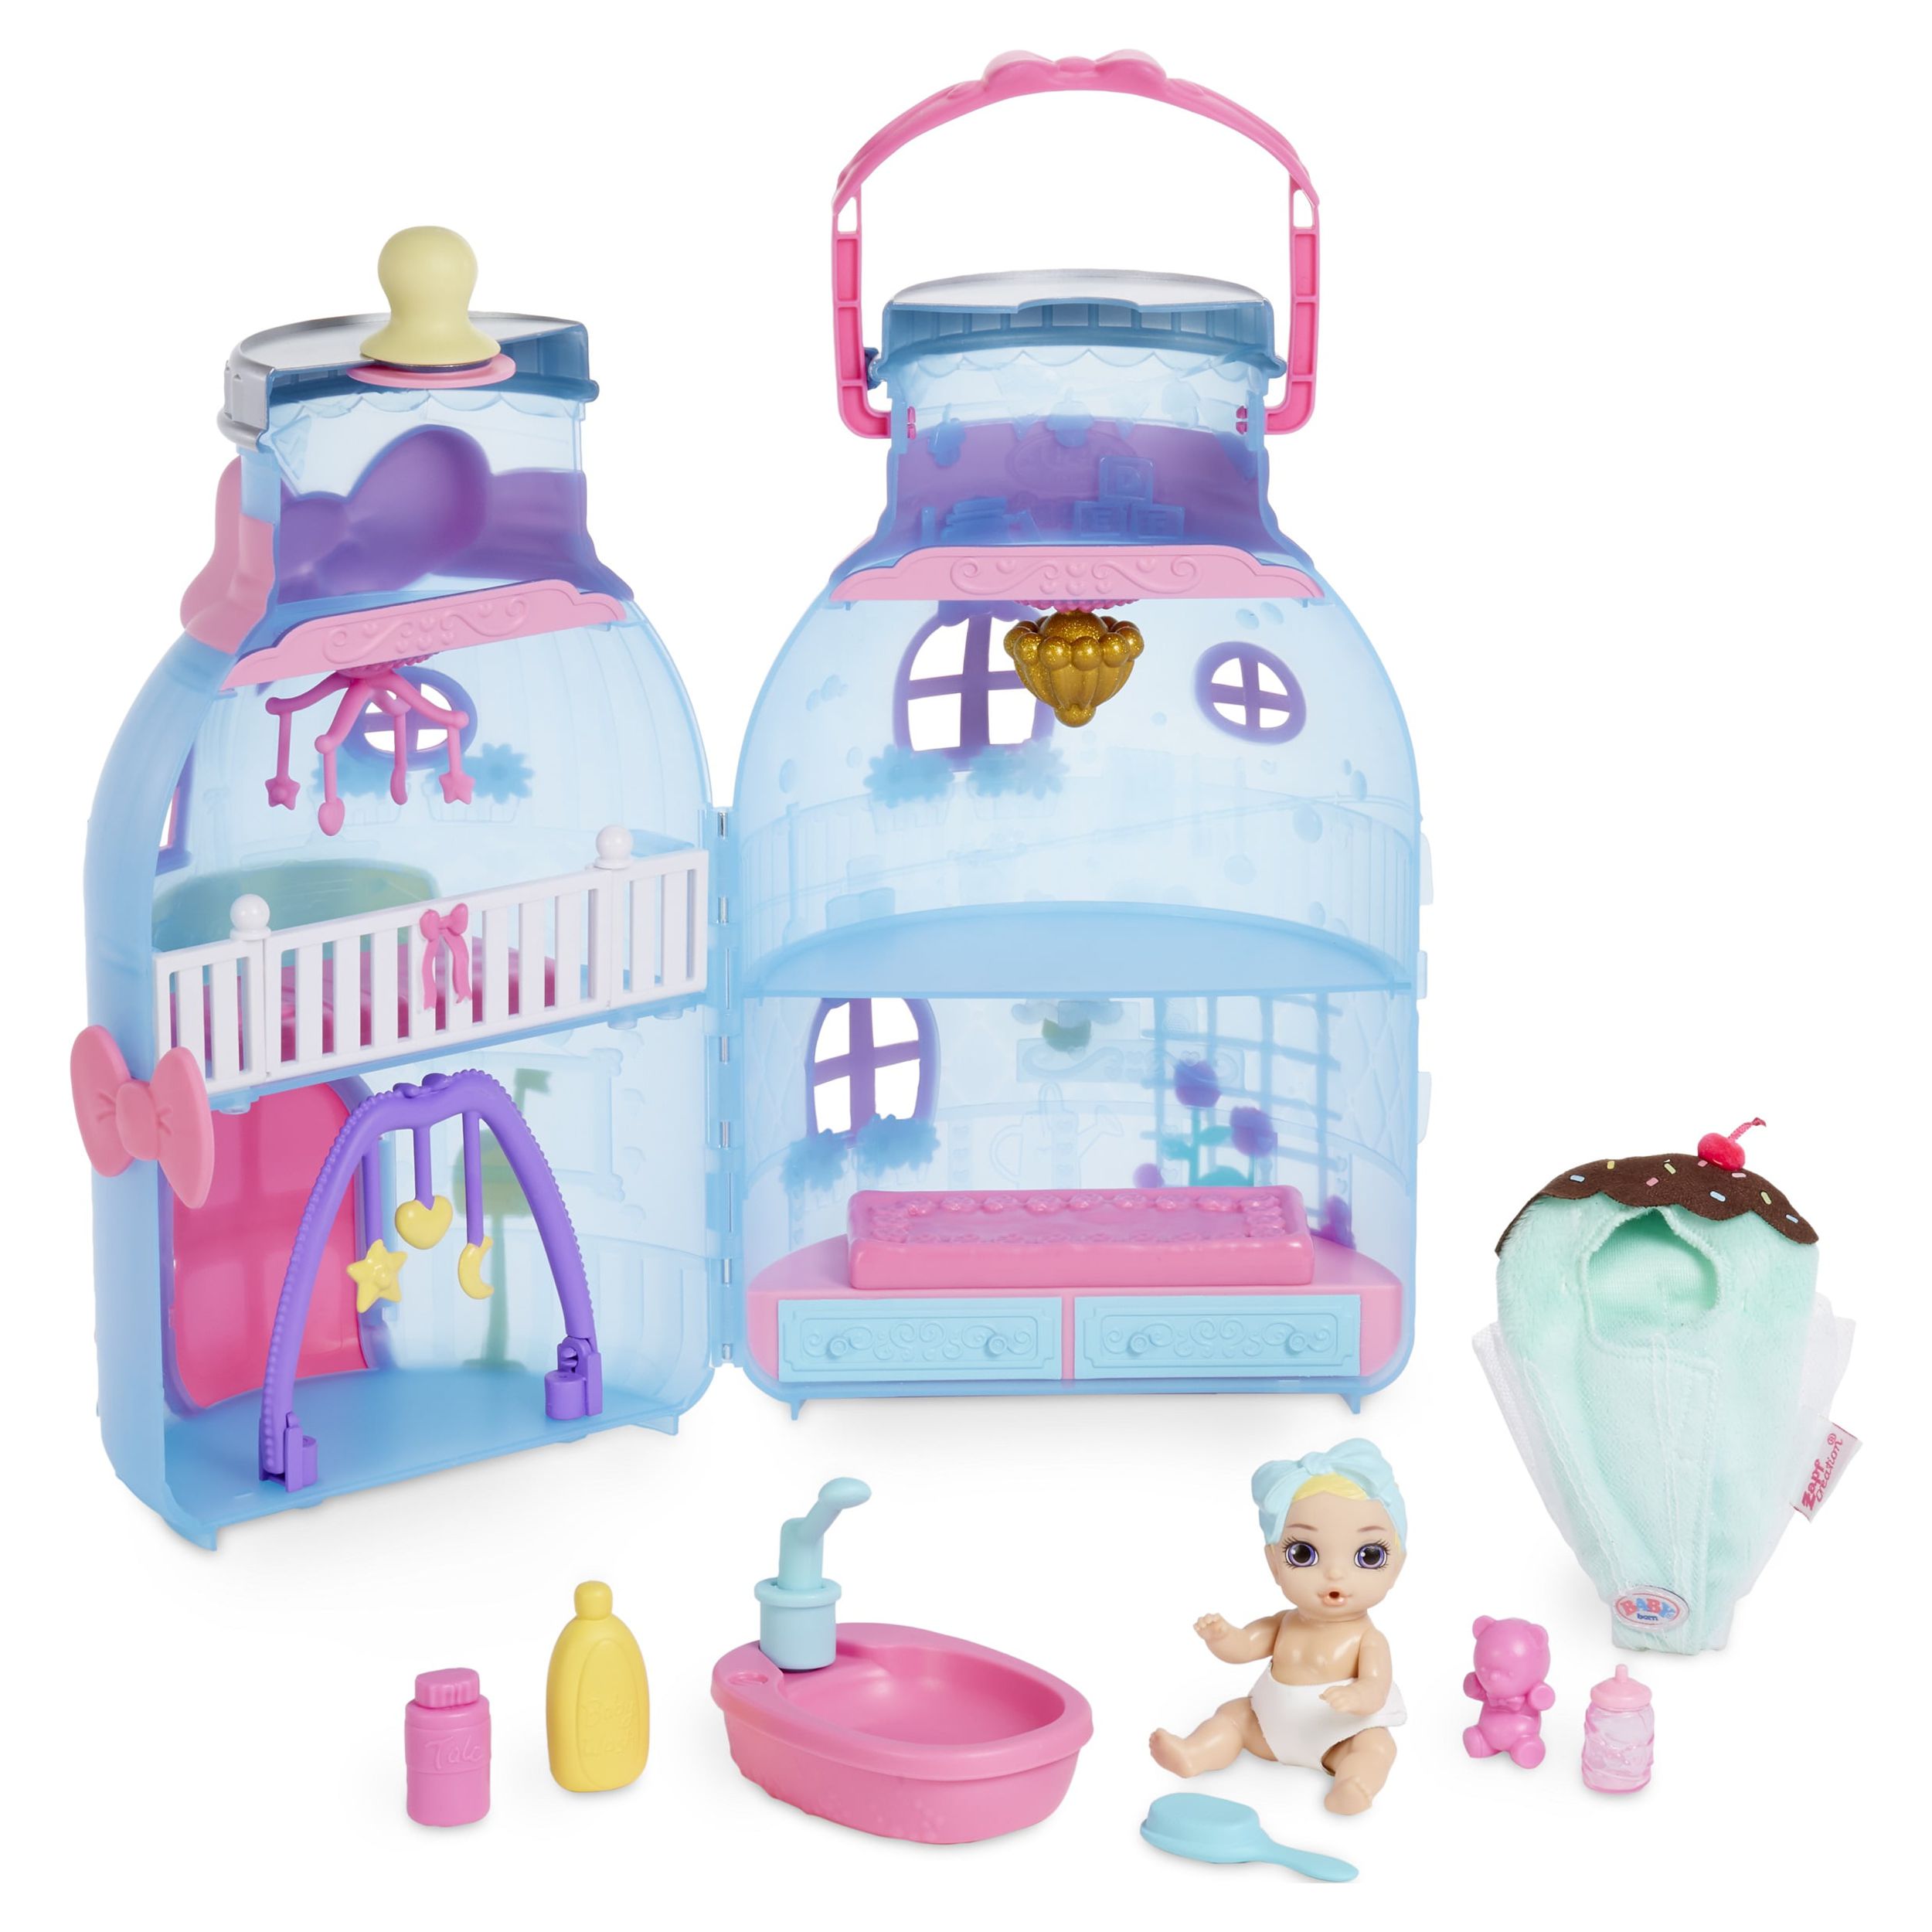 Baby Born Surprise Baby Bottle House with 20+ Surprises - image 1 of 7